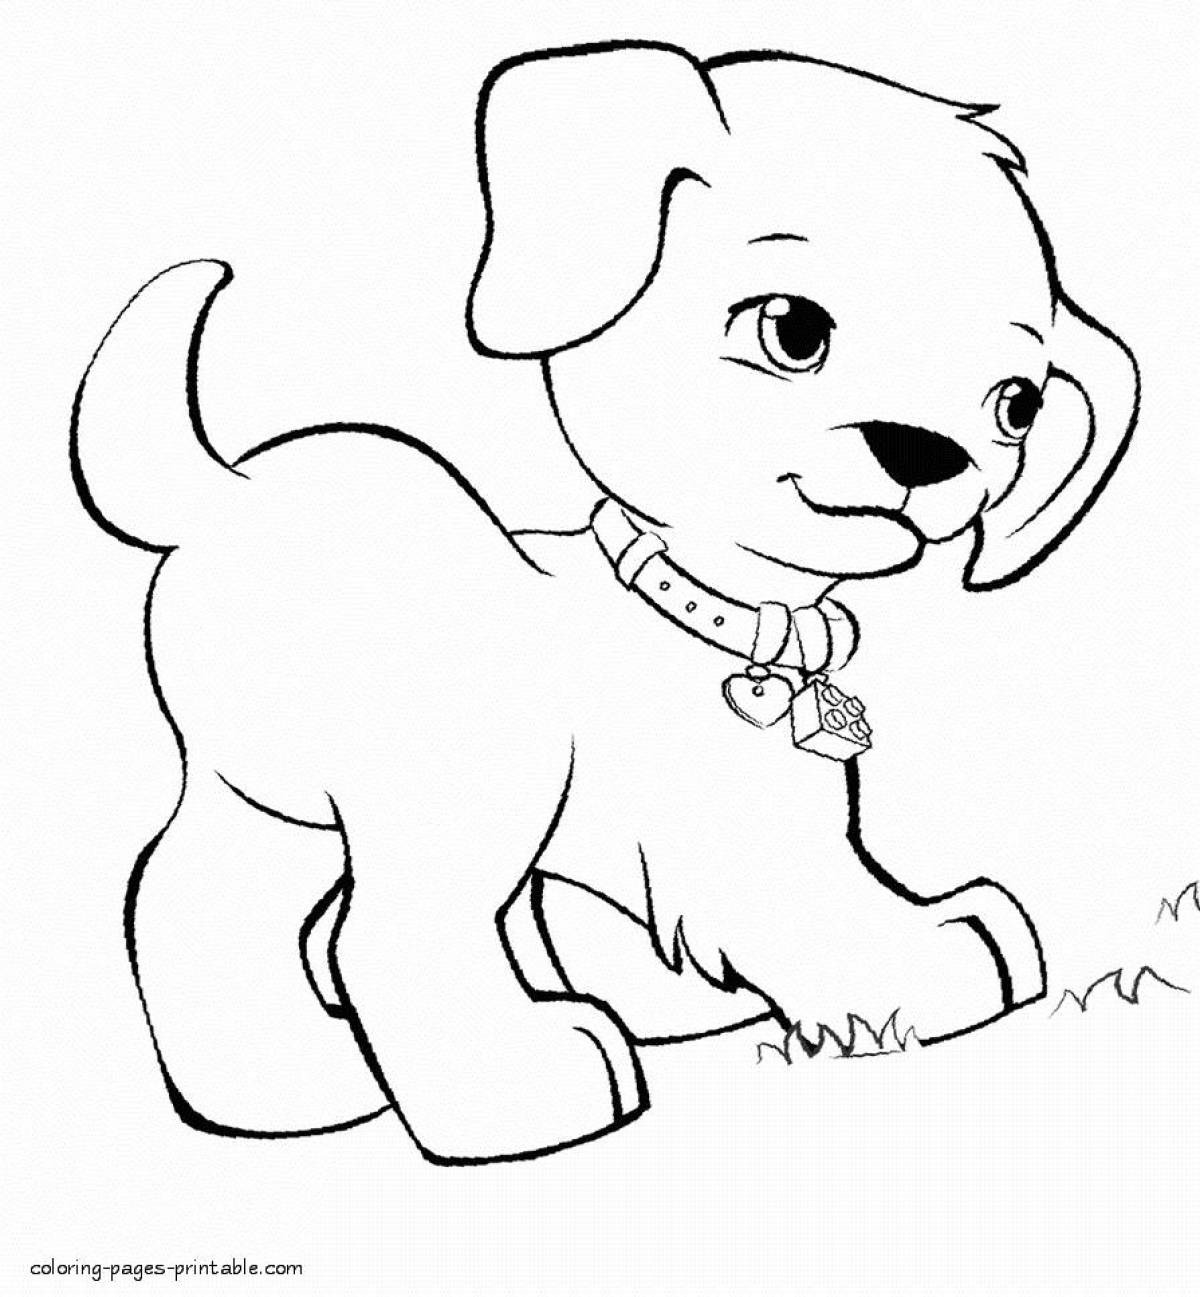 Playful doggie kitties coloring book for kids